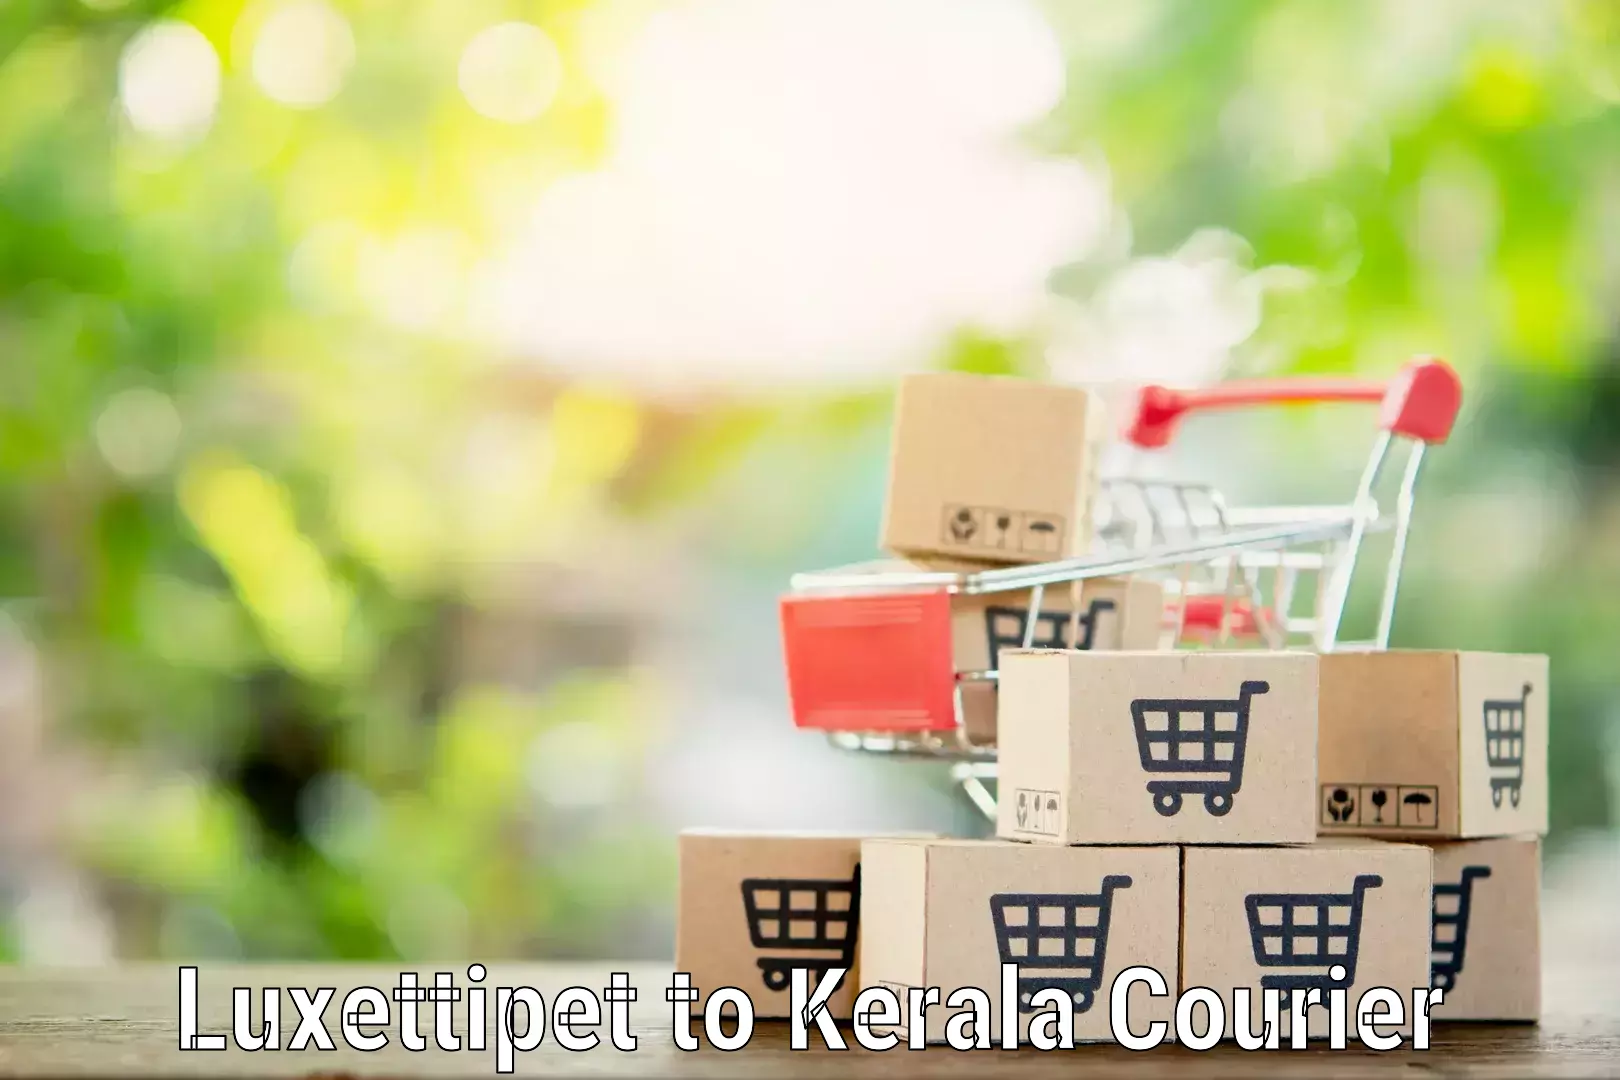 Efficient moving company Luxettipet to Aluva